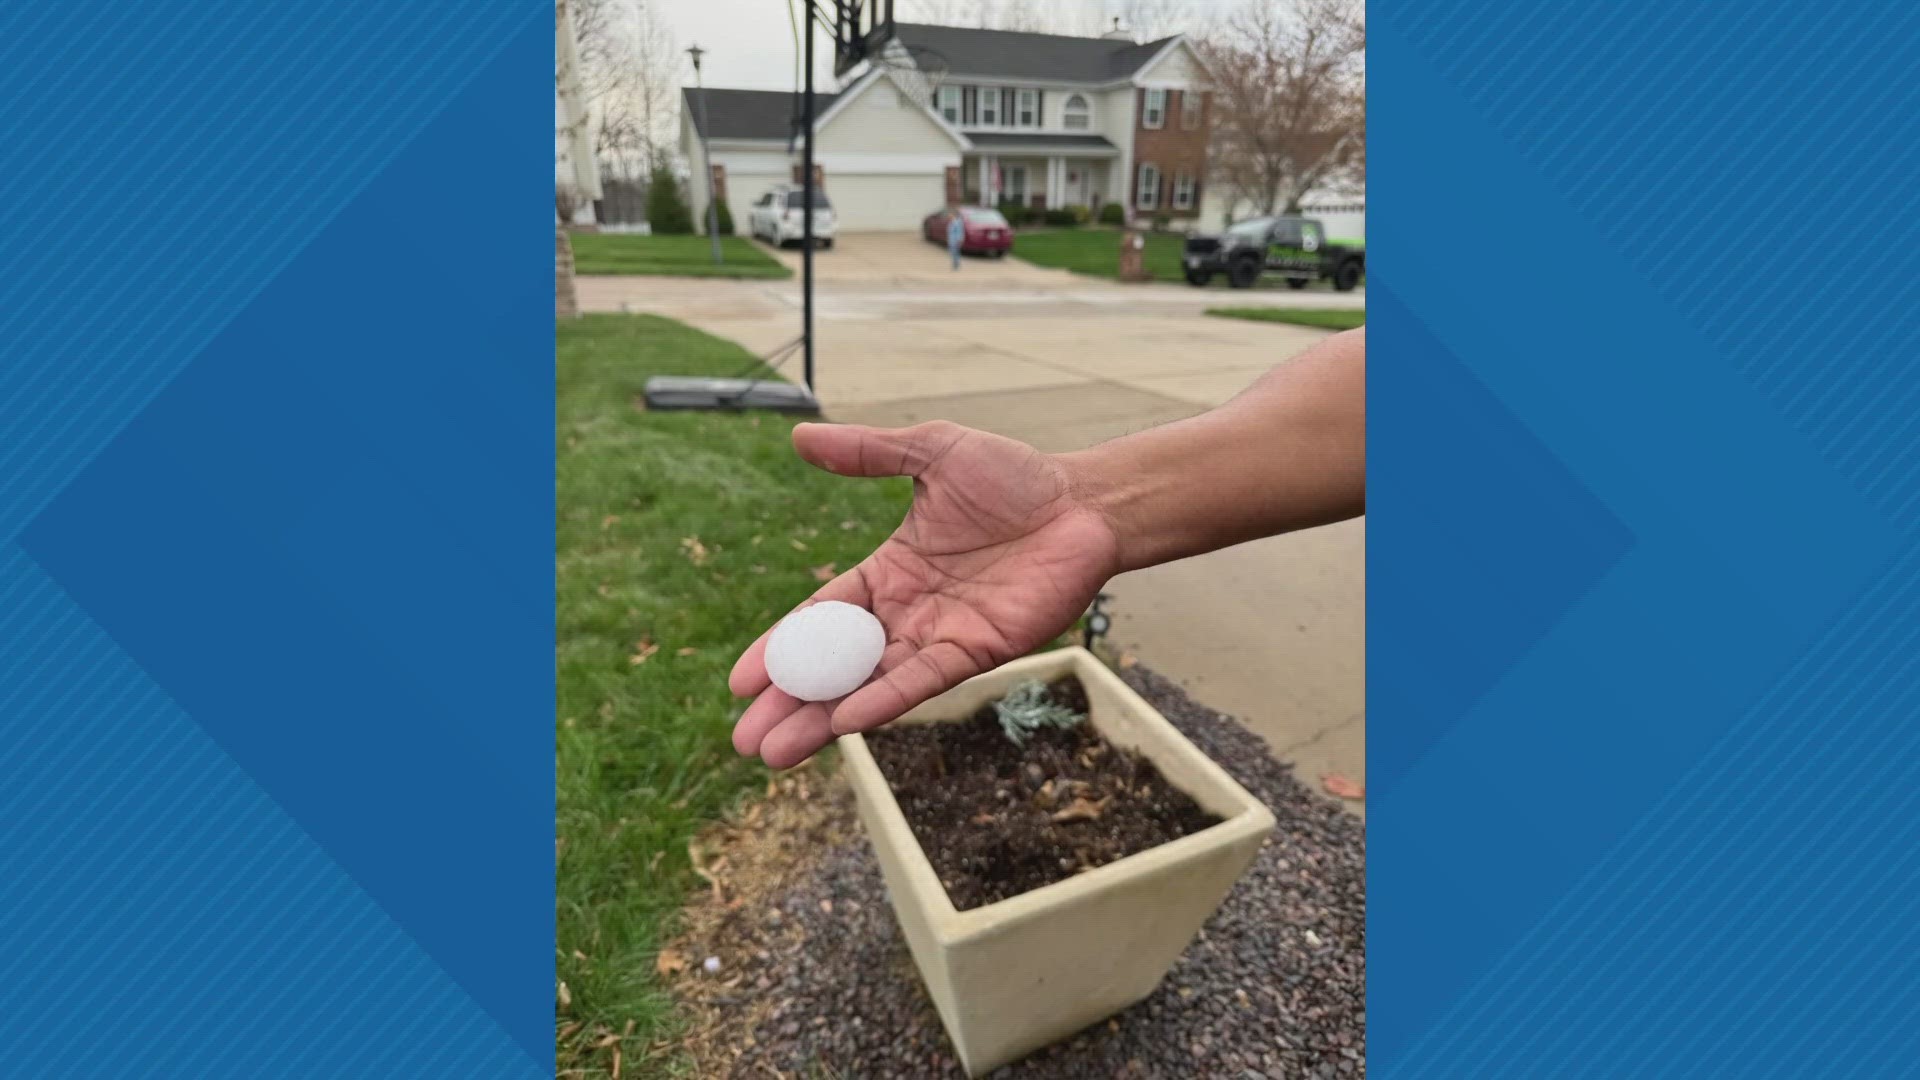 Storms brought damaging and dangerous hail to the Greater St. Louis area Thursday afternoon. O'Fallon, Missouri, was one of the hardest hit.